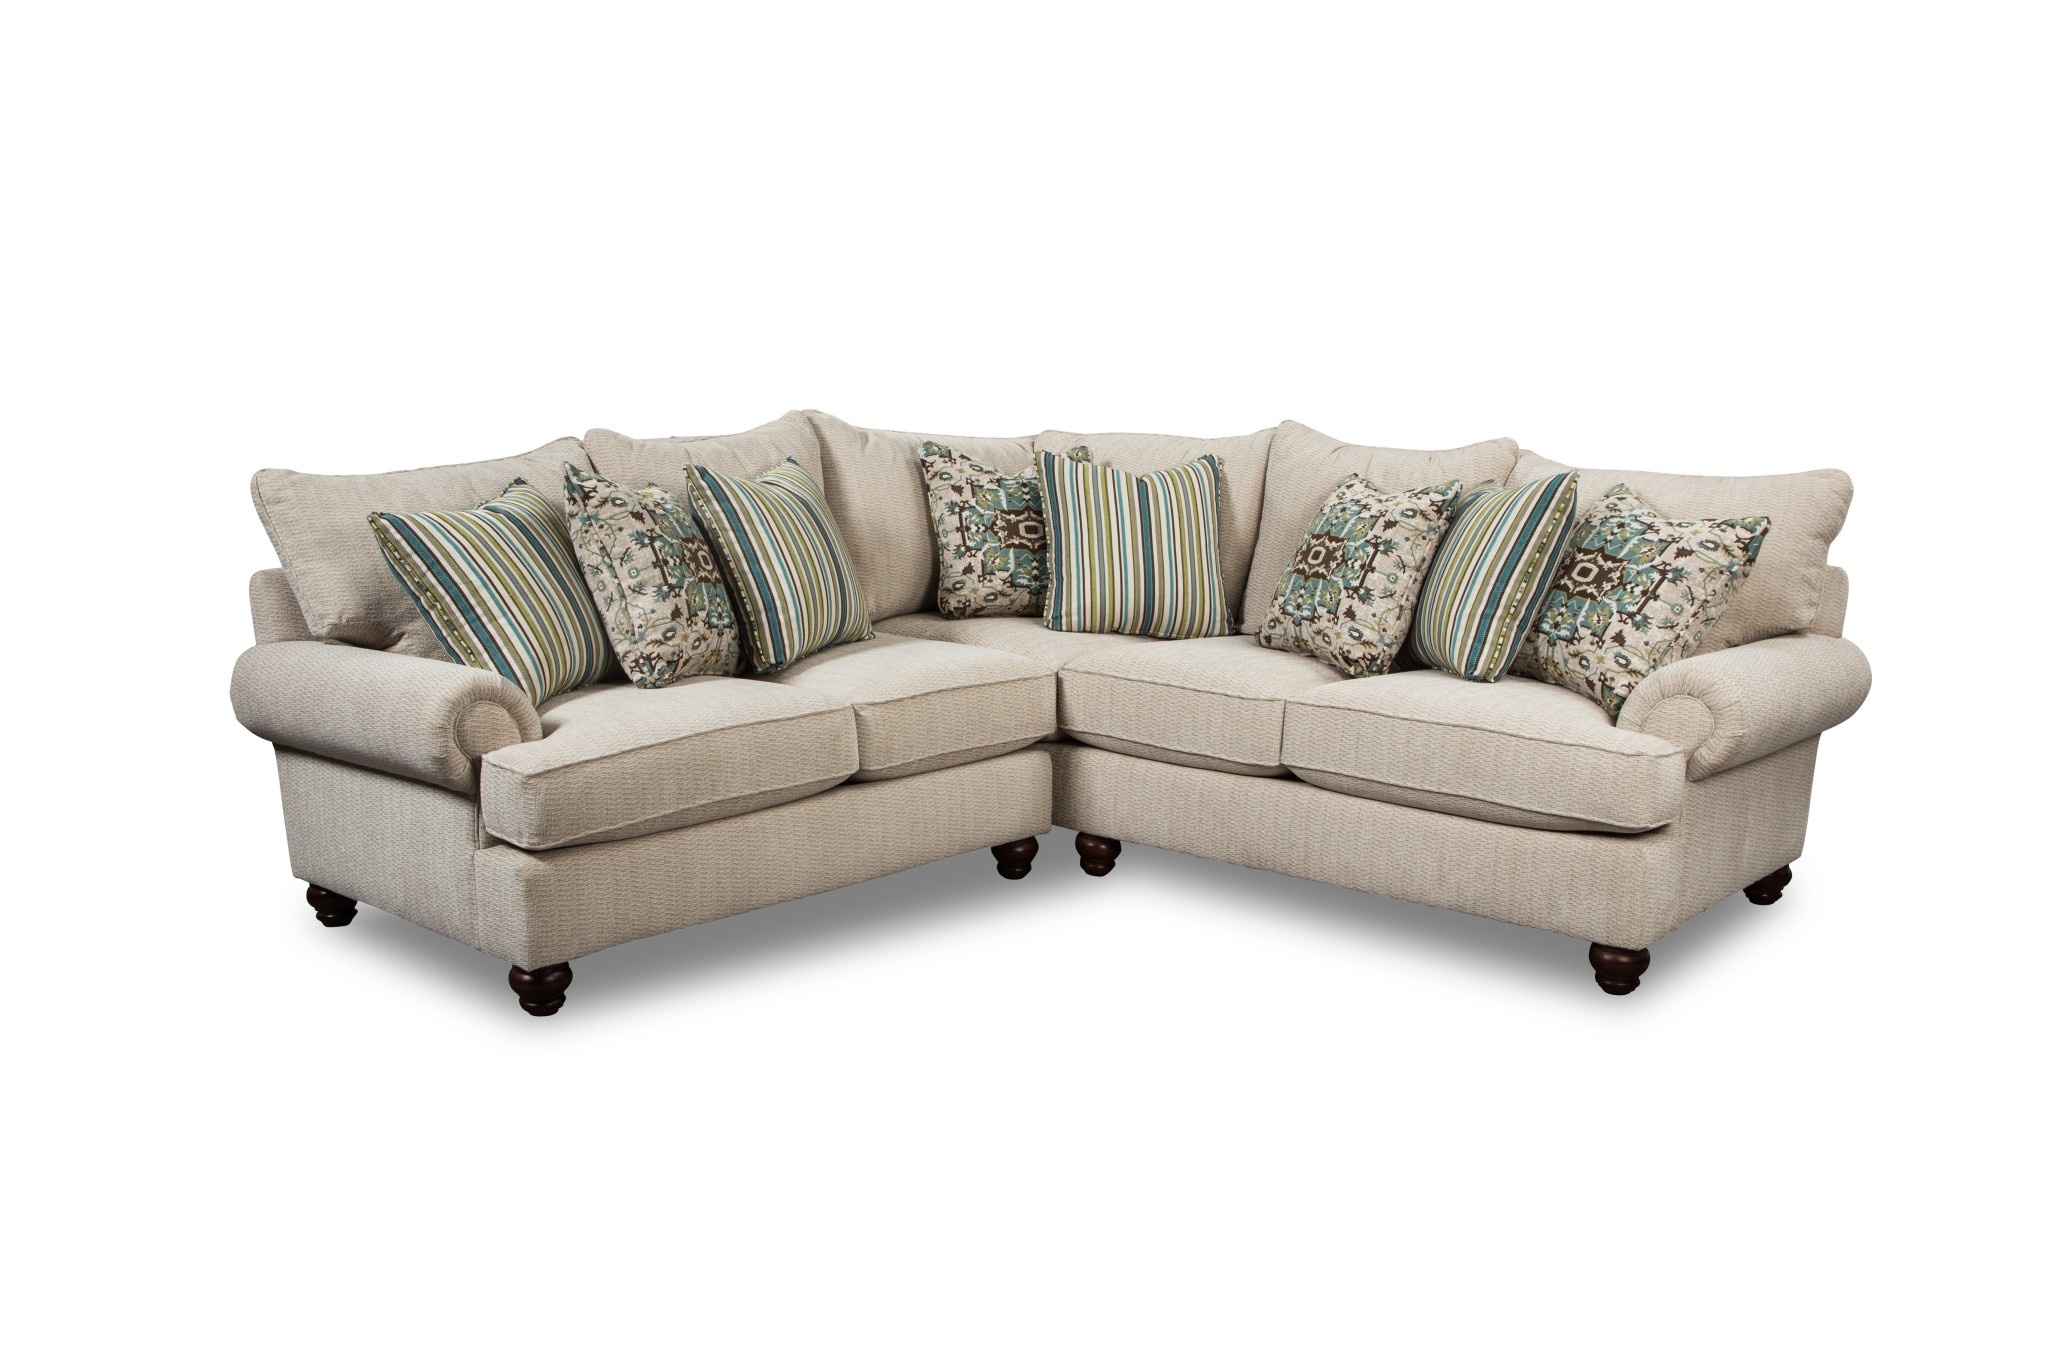 Craftmaster Furniture 7970 Sectional